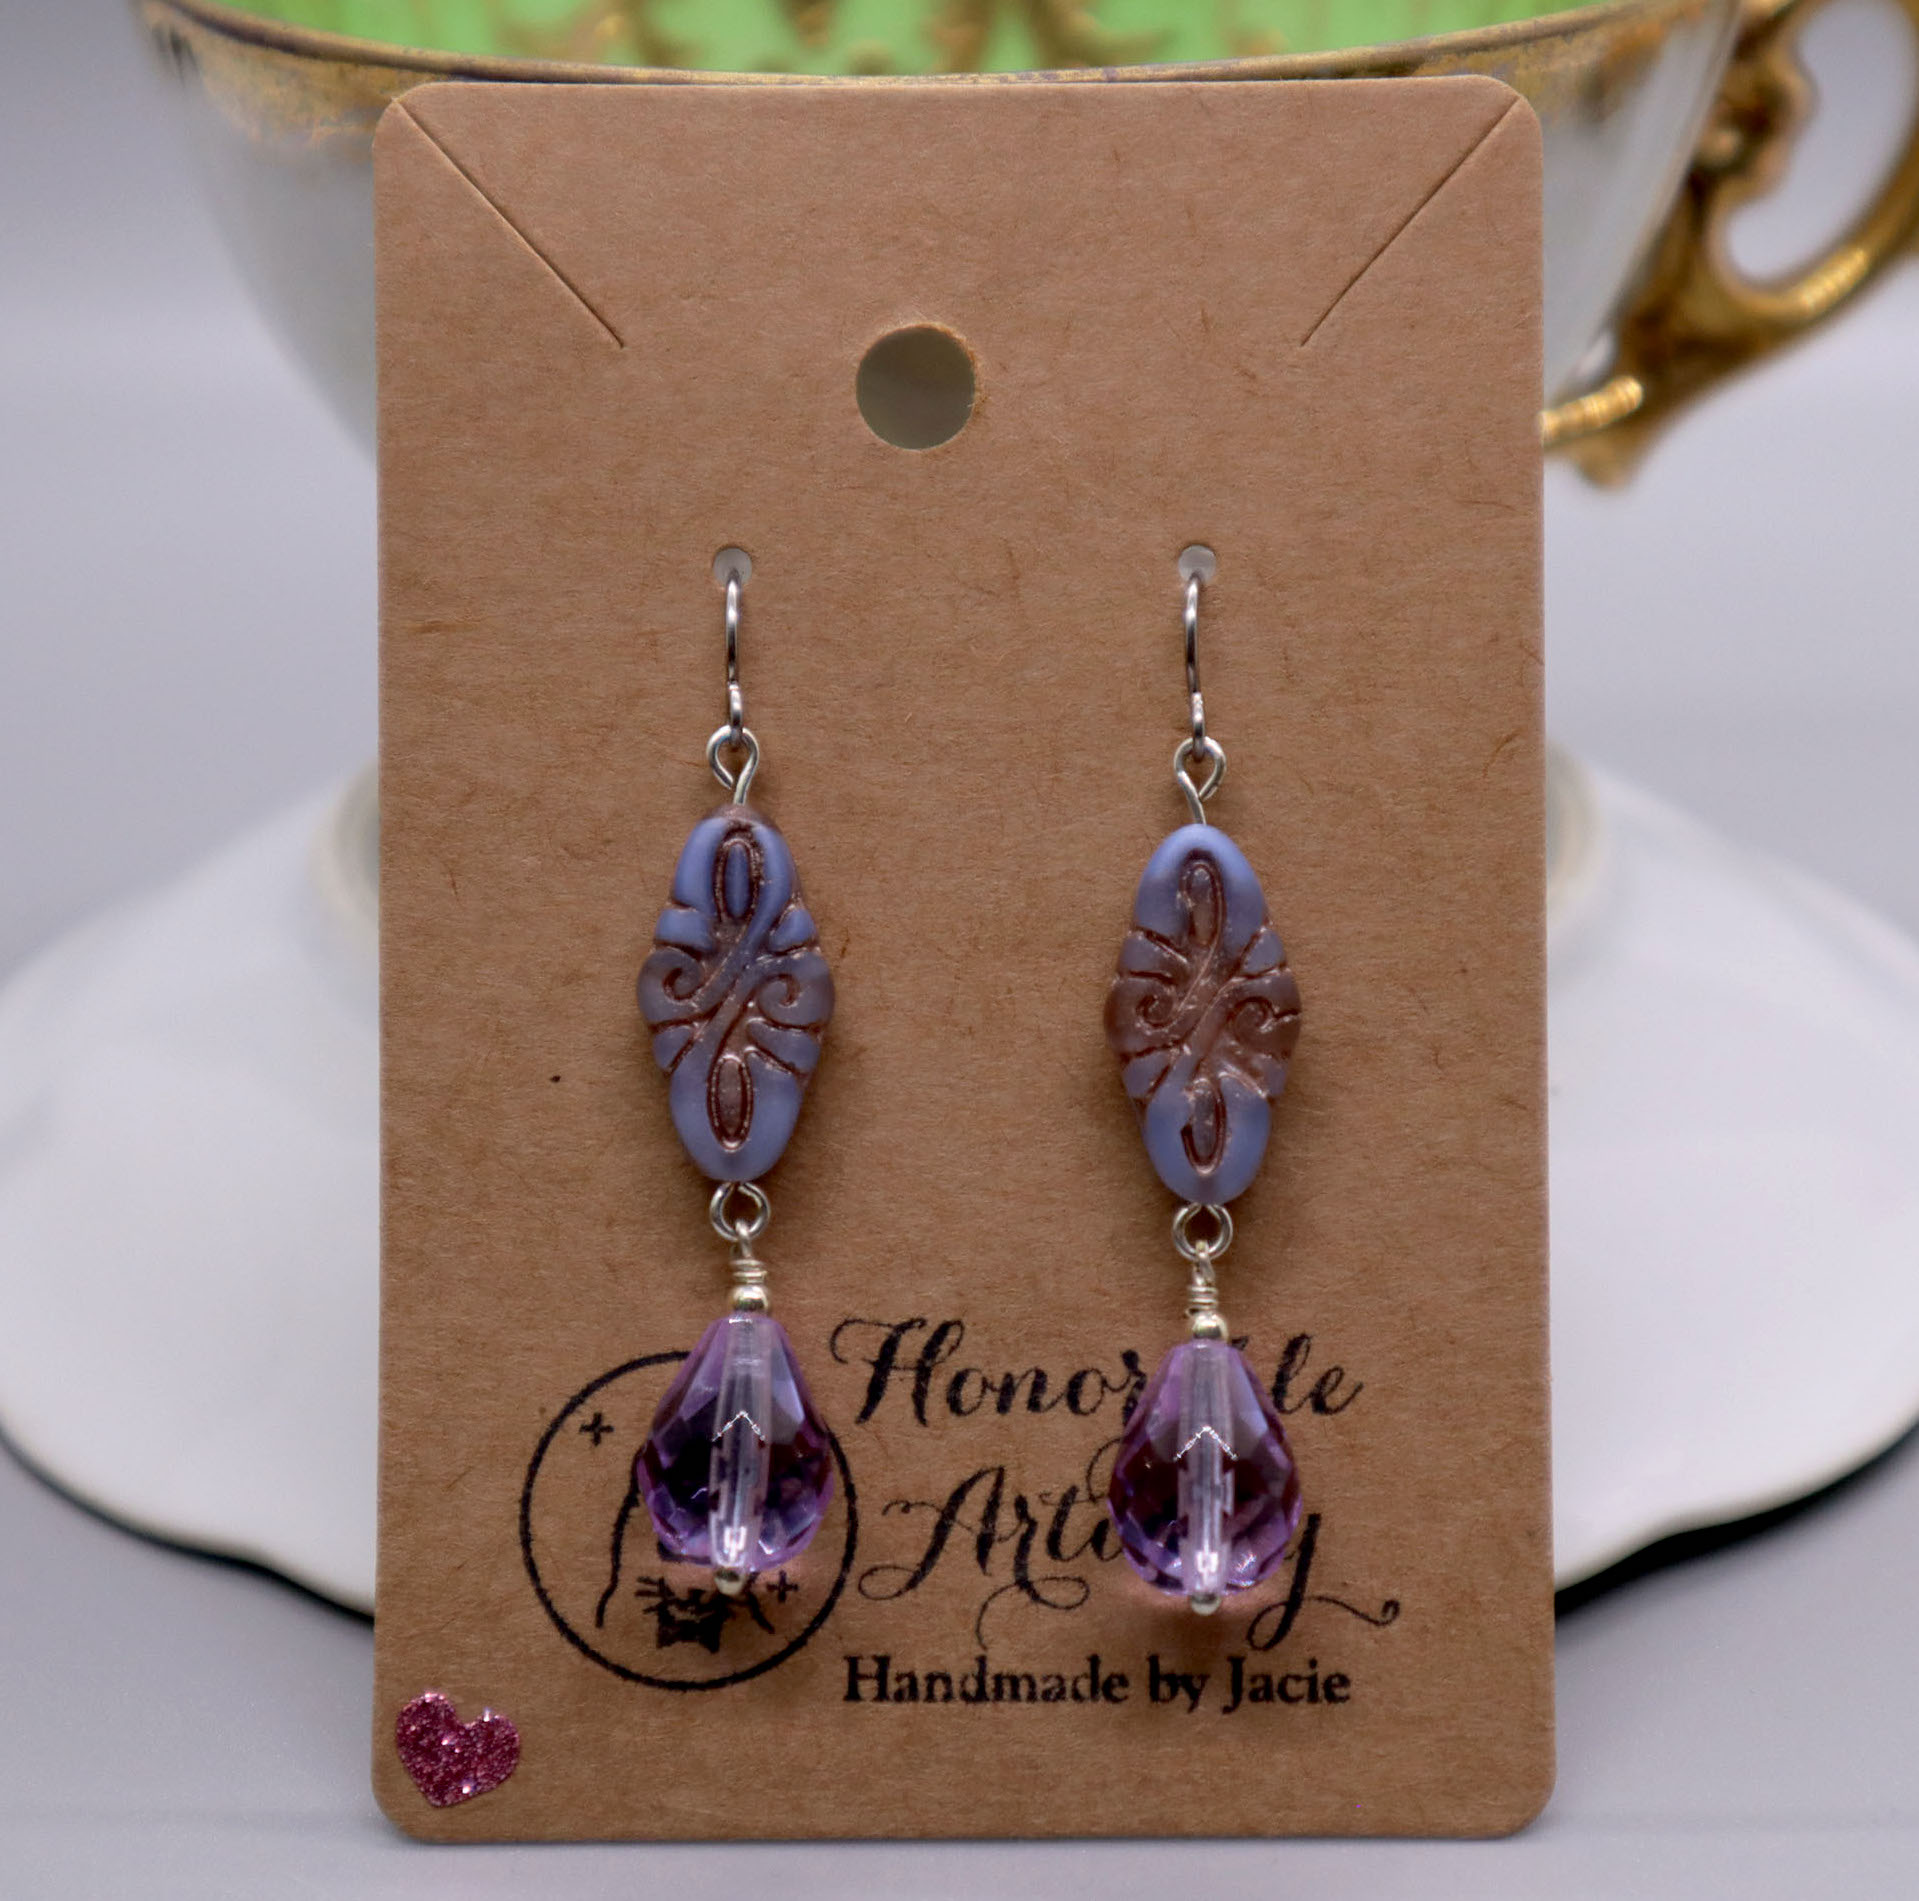 Purple earrings on a earring card displayed sitting on a teacup.